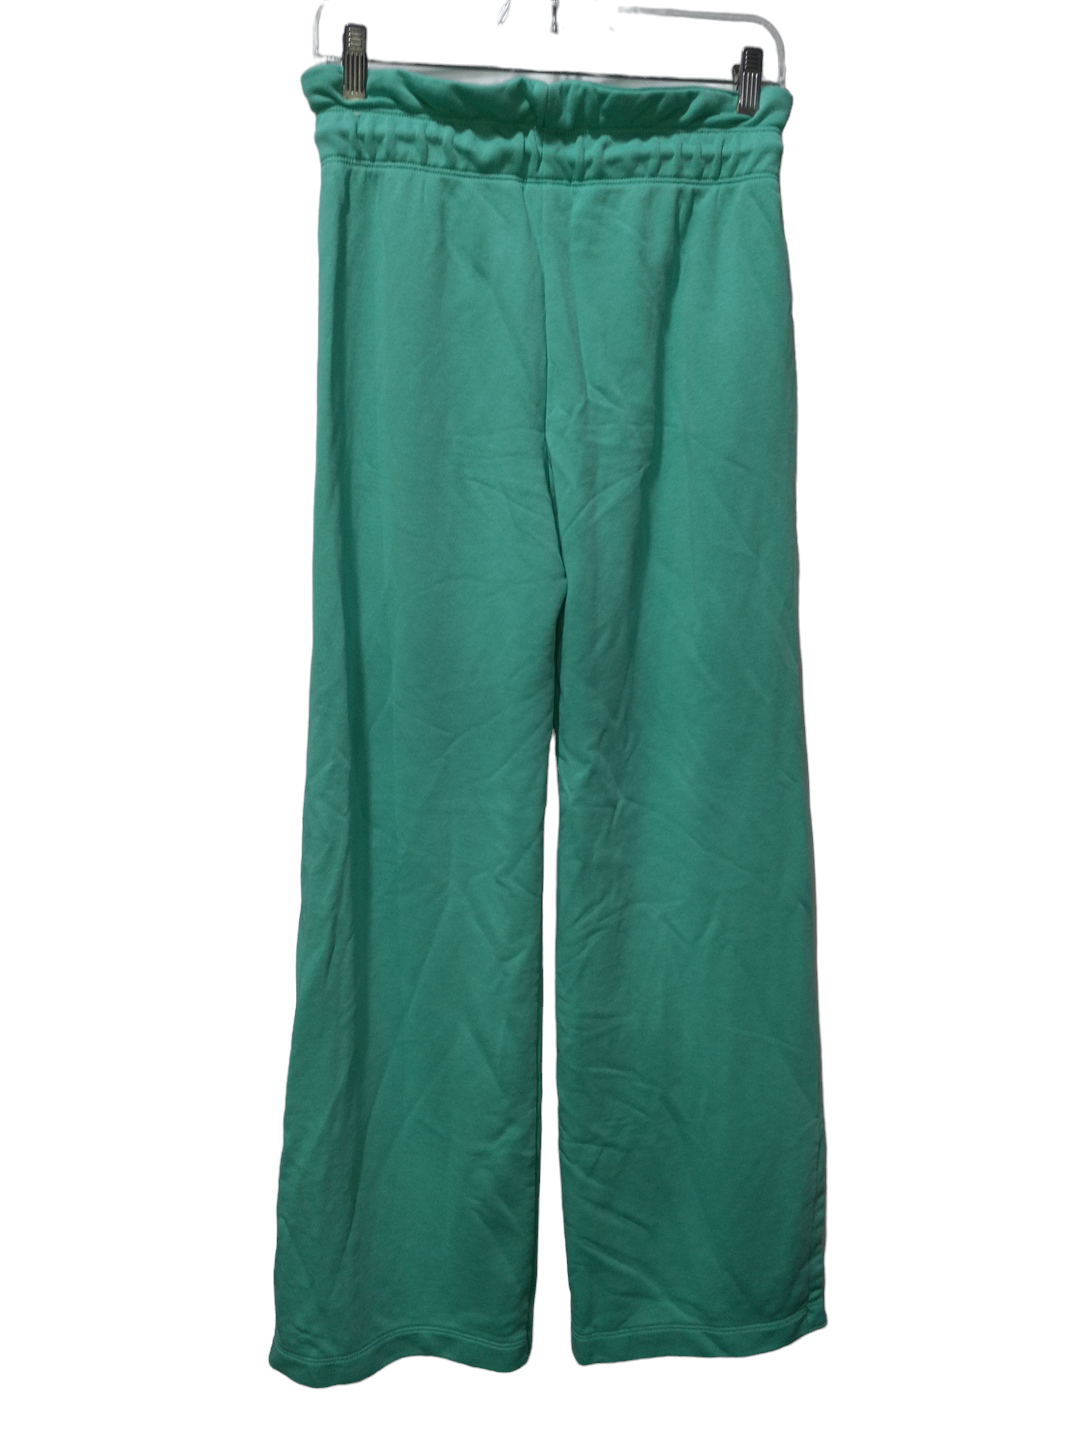 Green Athletic Pants Nike Apparel, Size S